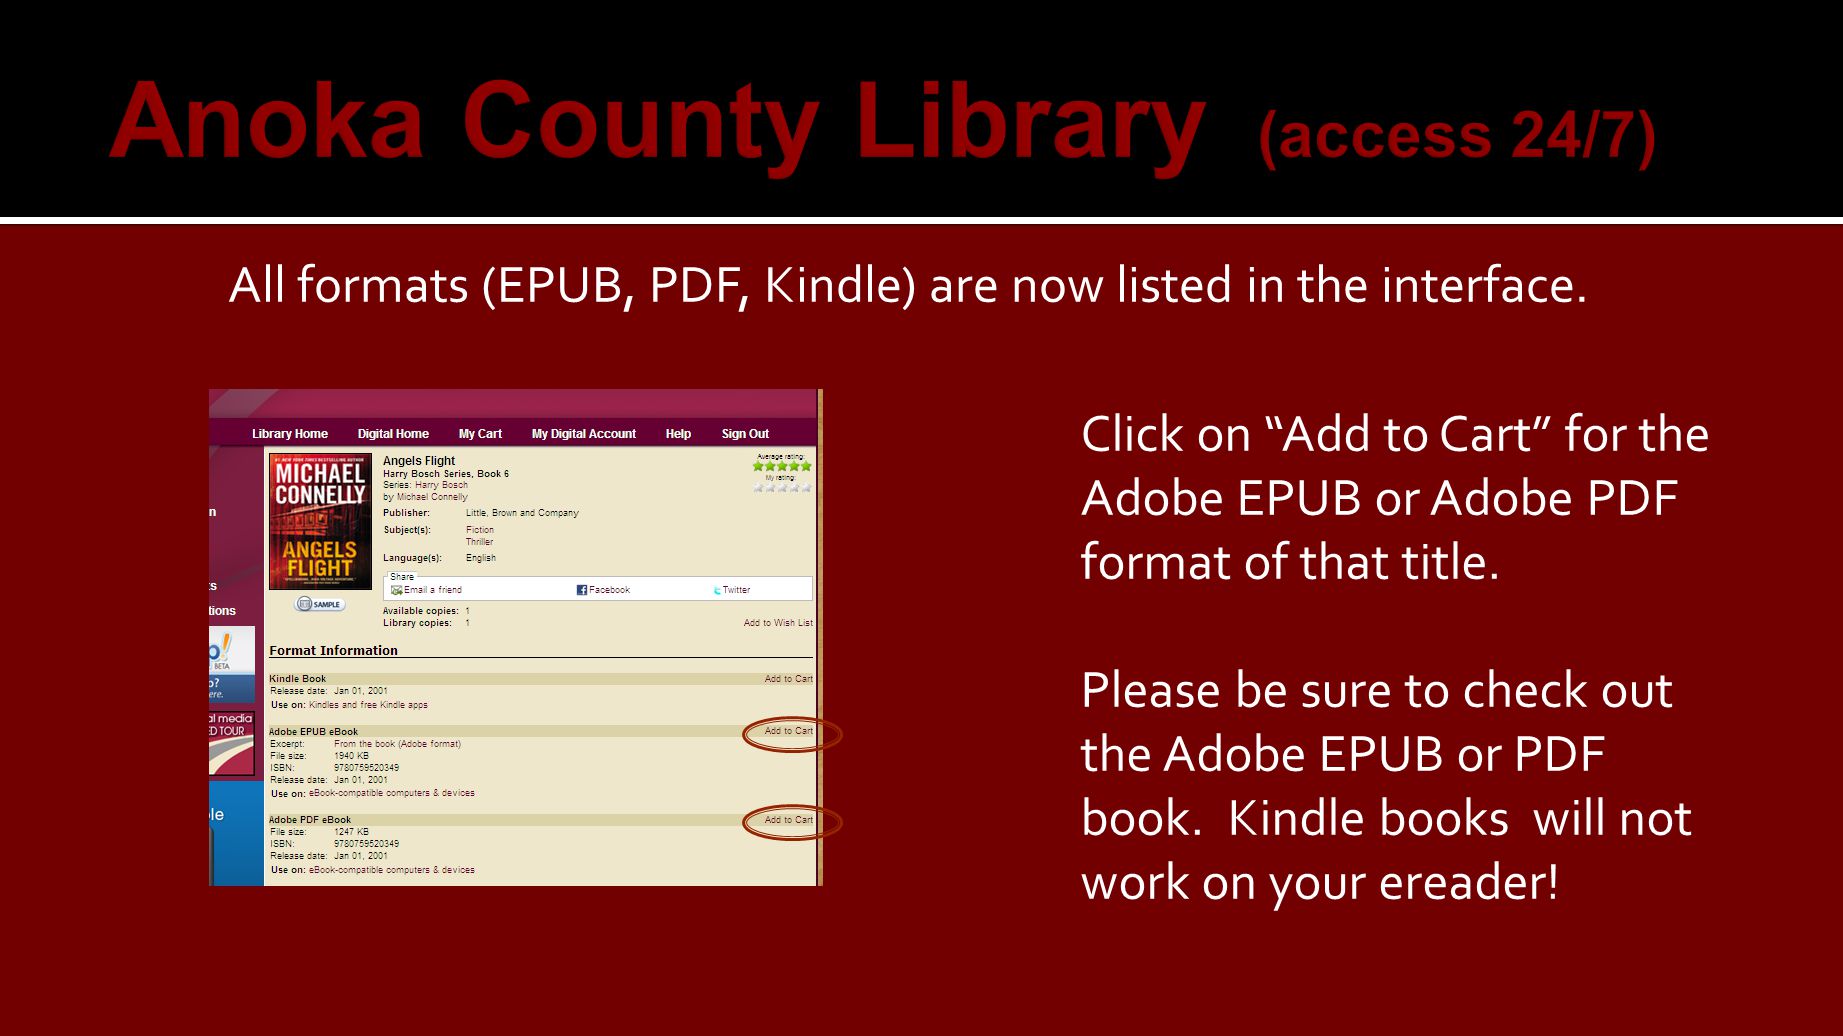 All formats (EPUB, PDF, Kindle) are now listed in the interface.